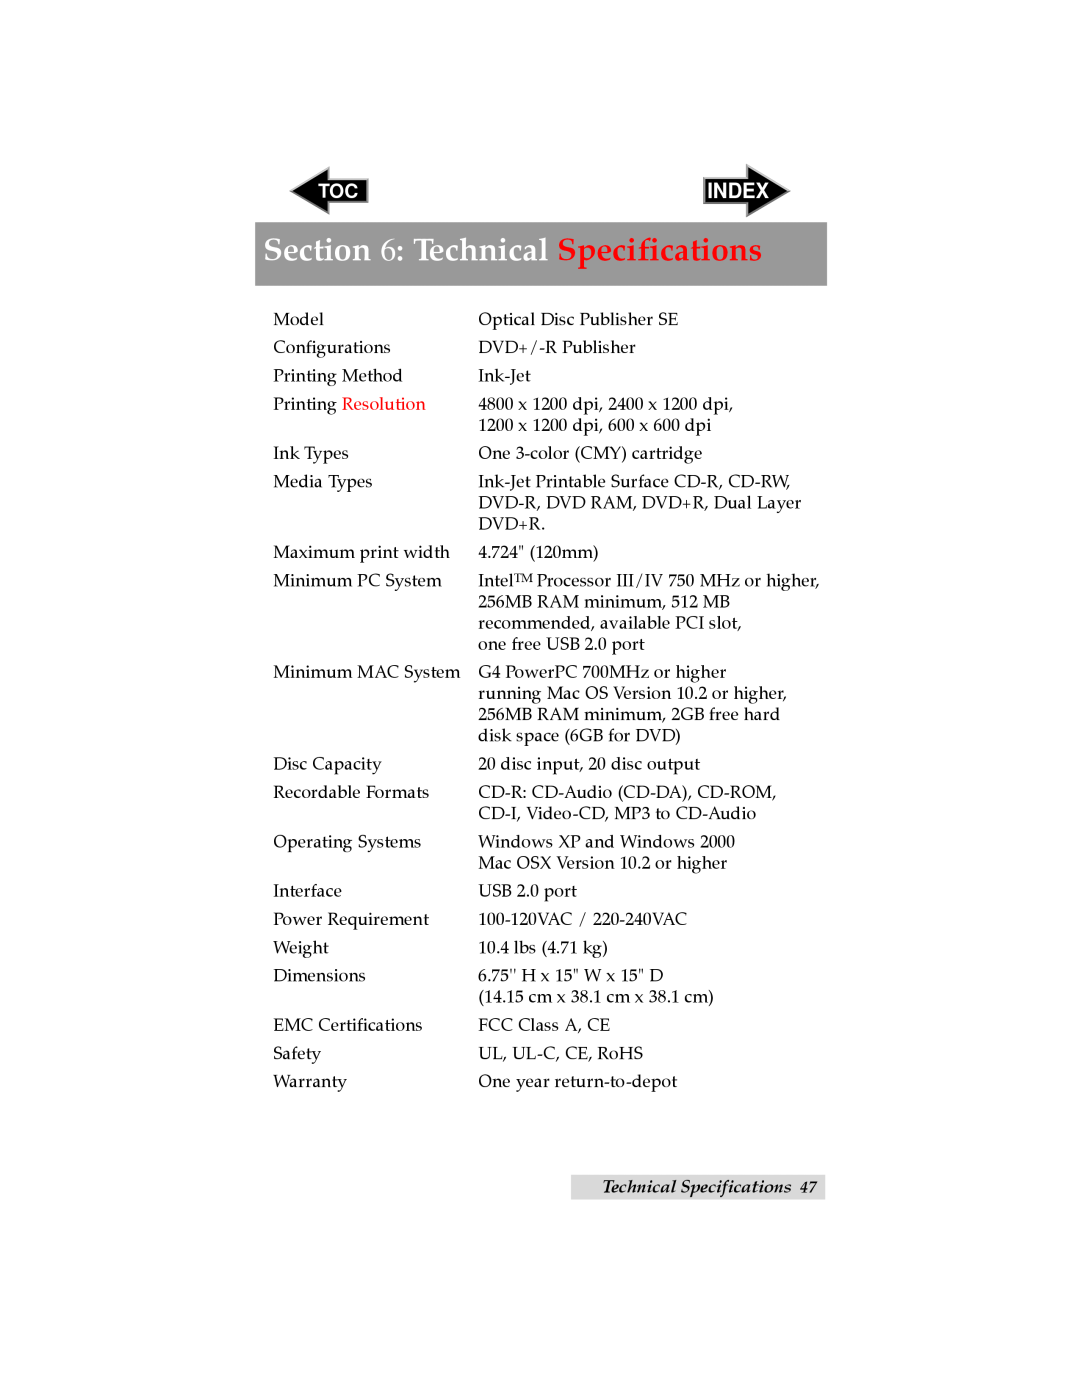 Primera Technology SE user manual Technical Specifications, Index, Printing Resolution 